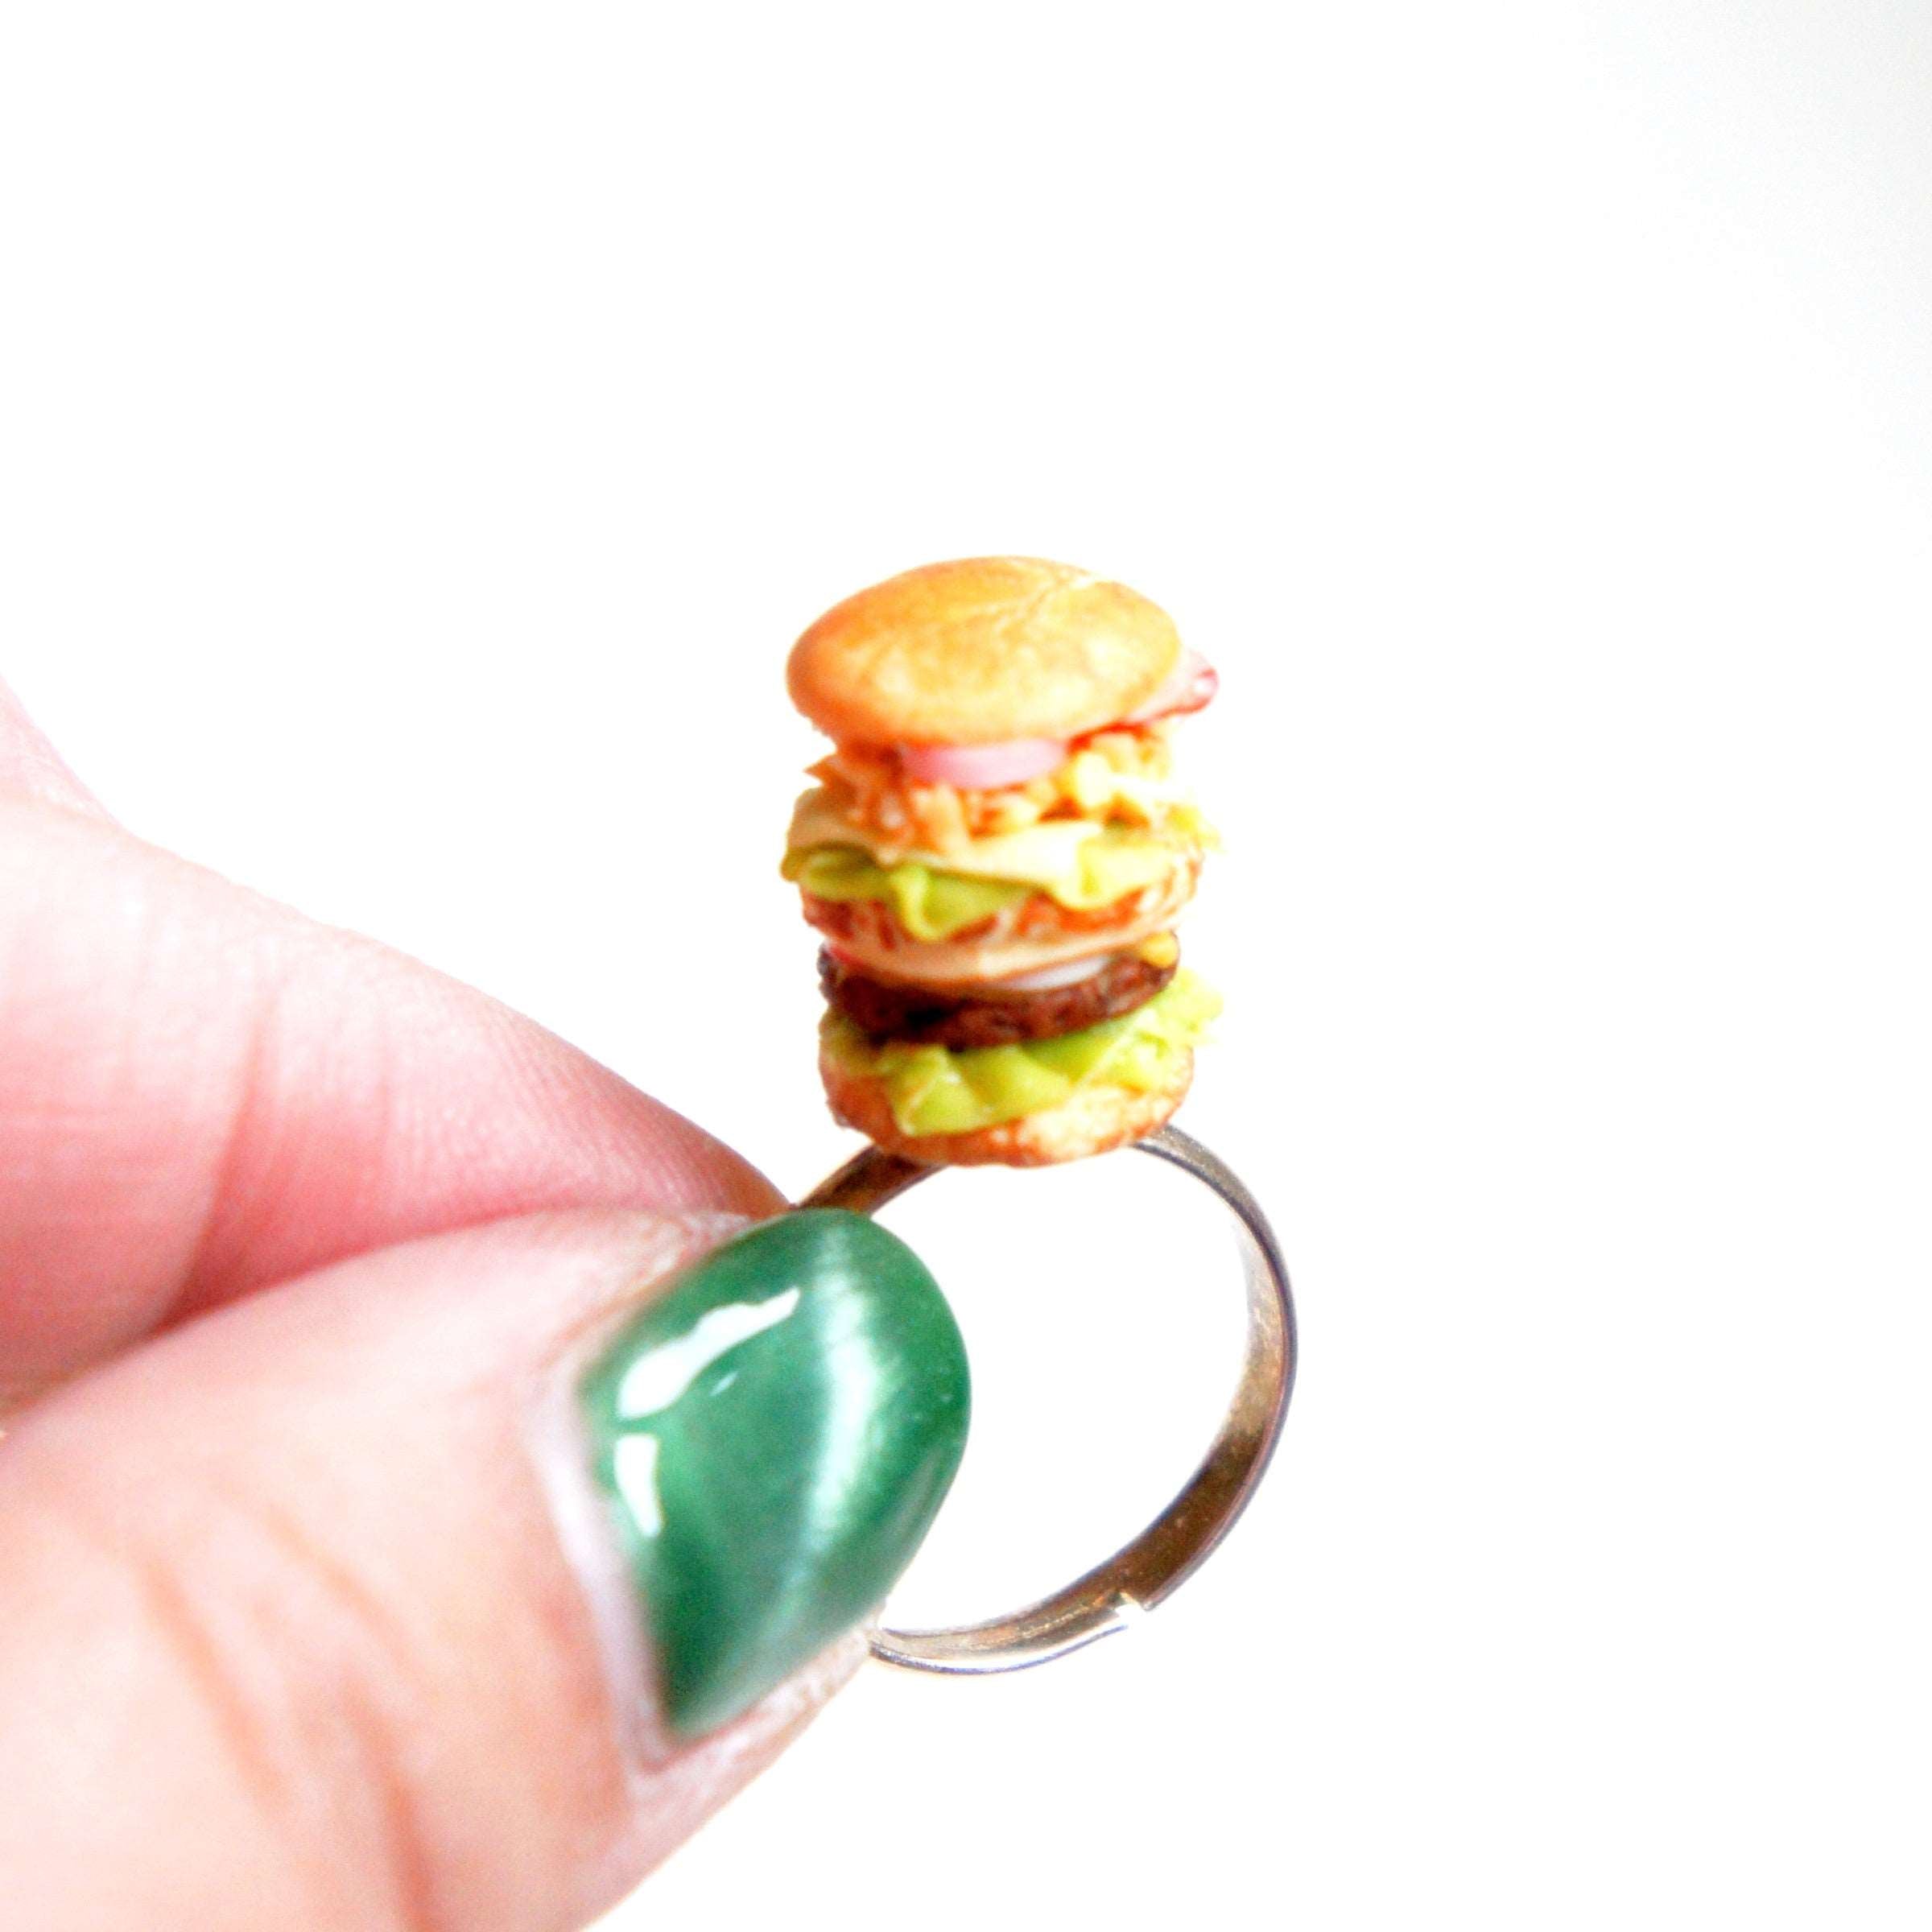 Deluxe Burger Ring - Jillicious charms and accessories